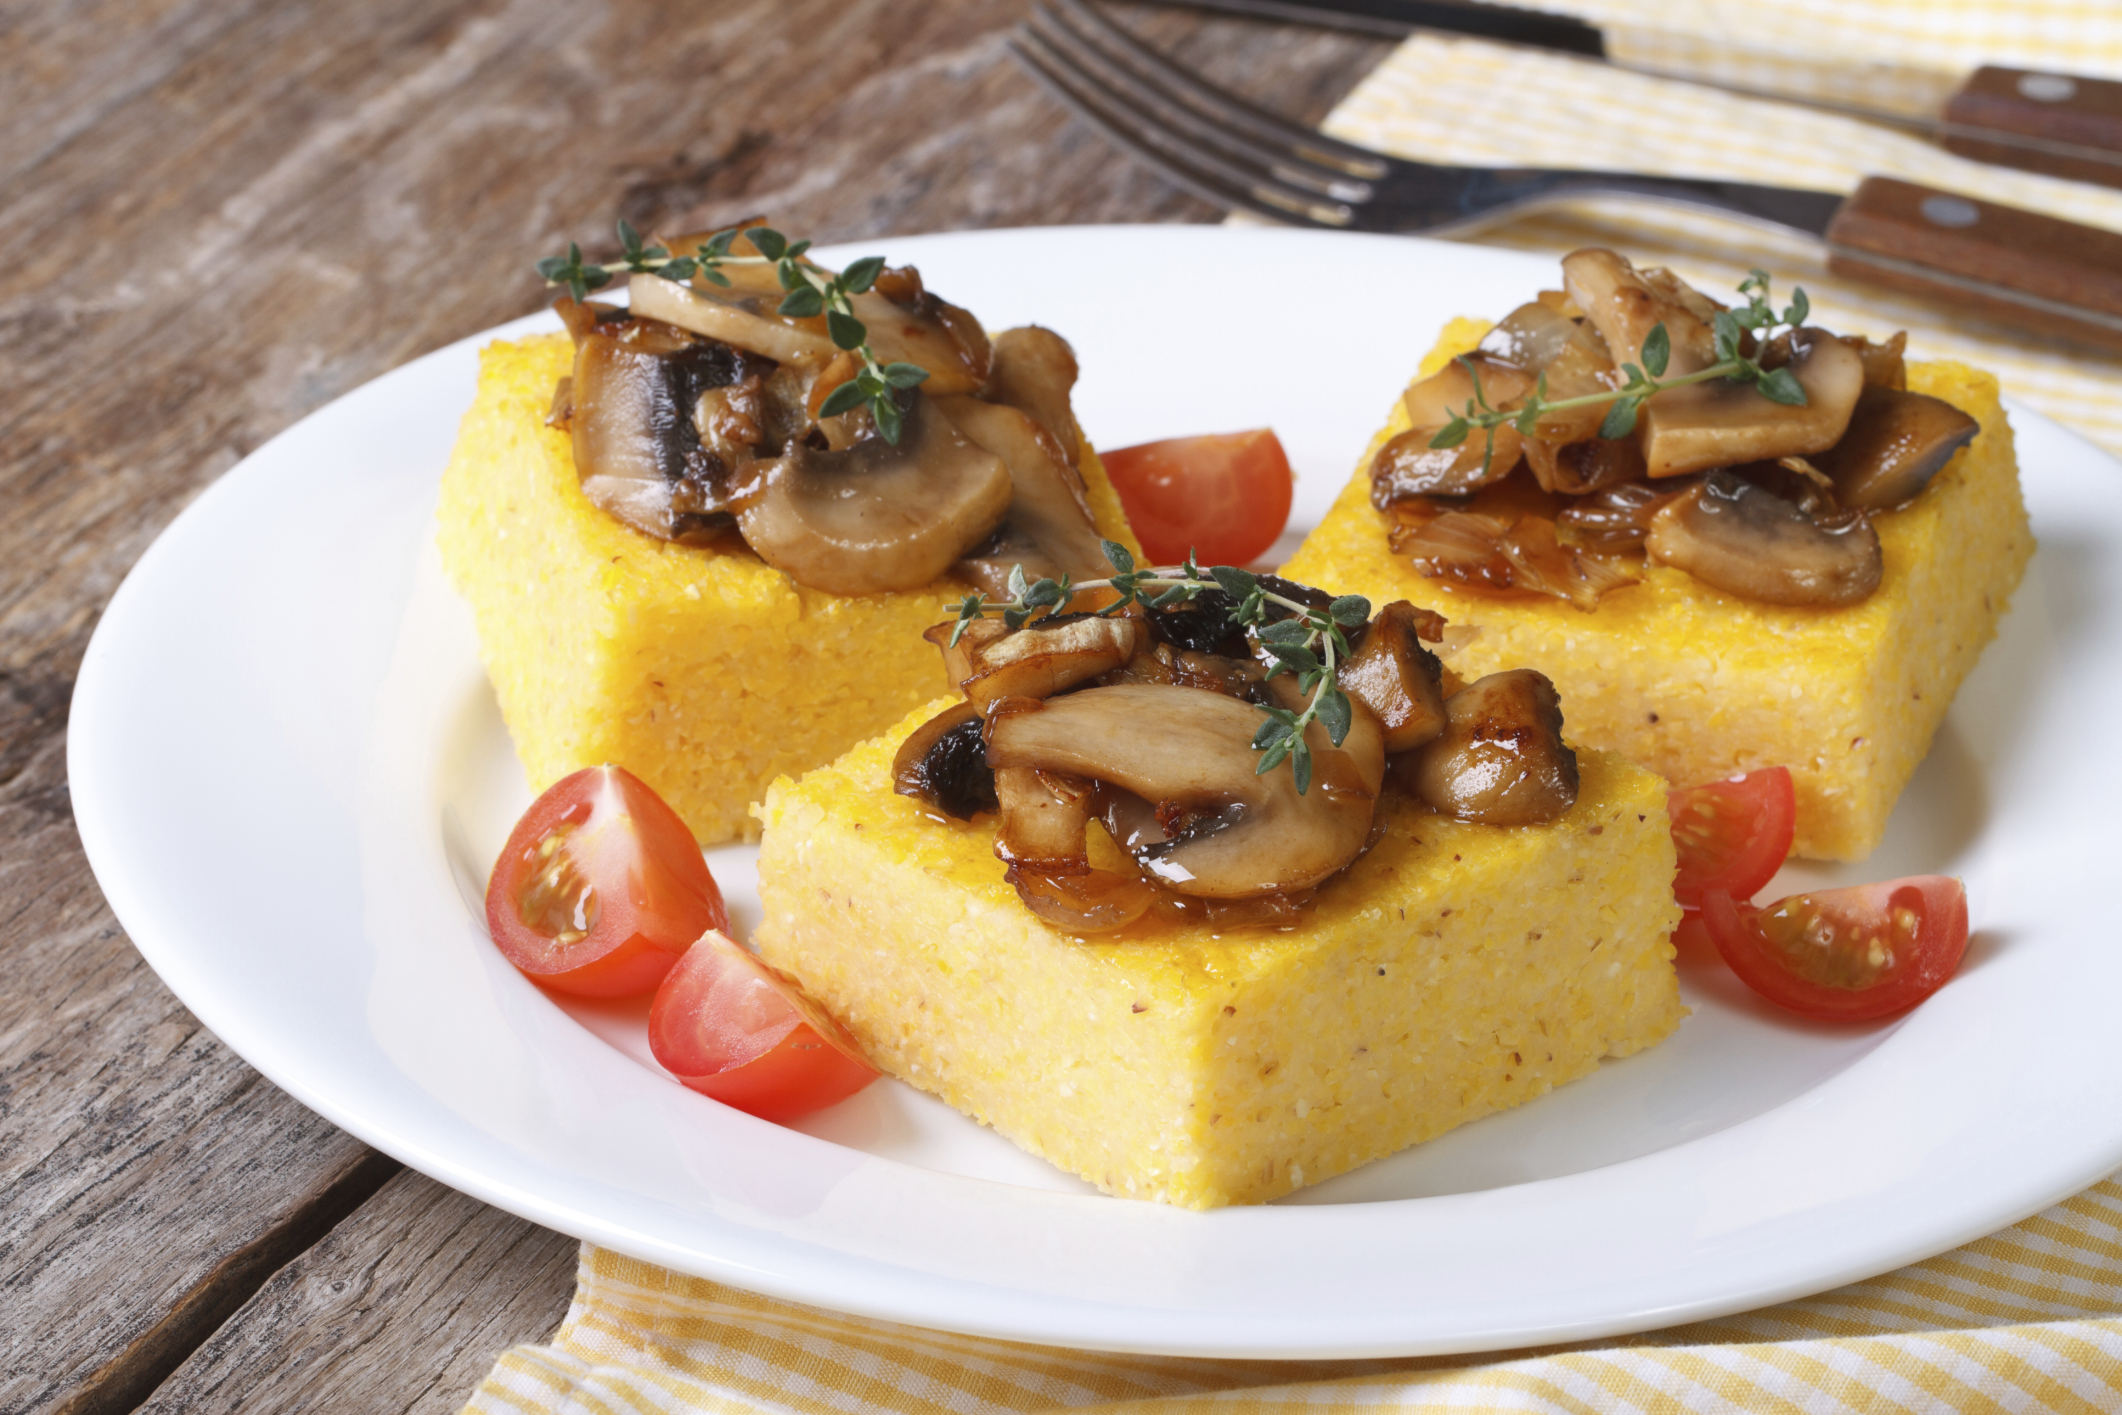 Polenta with mushrooms, tomatoes and thyme on the table